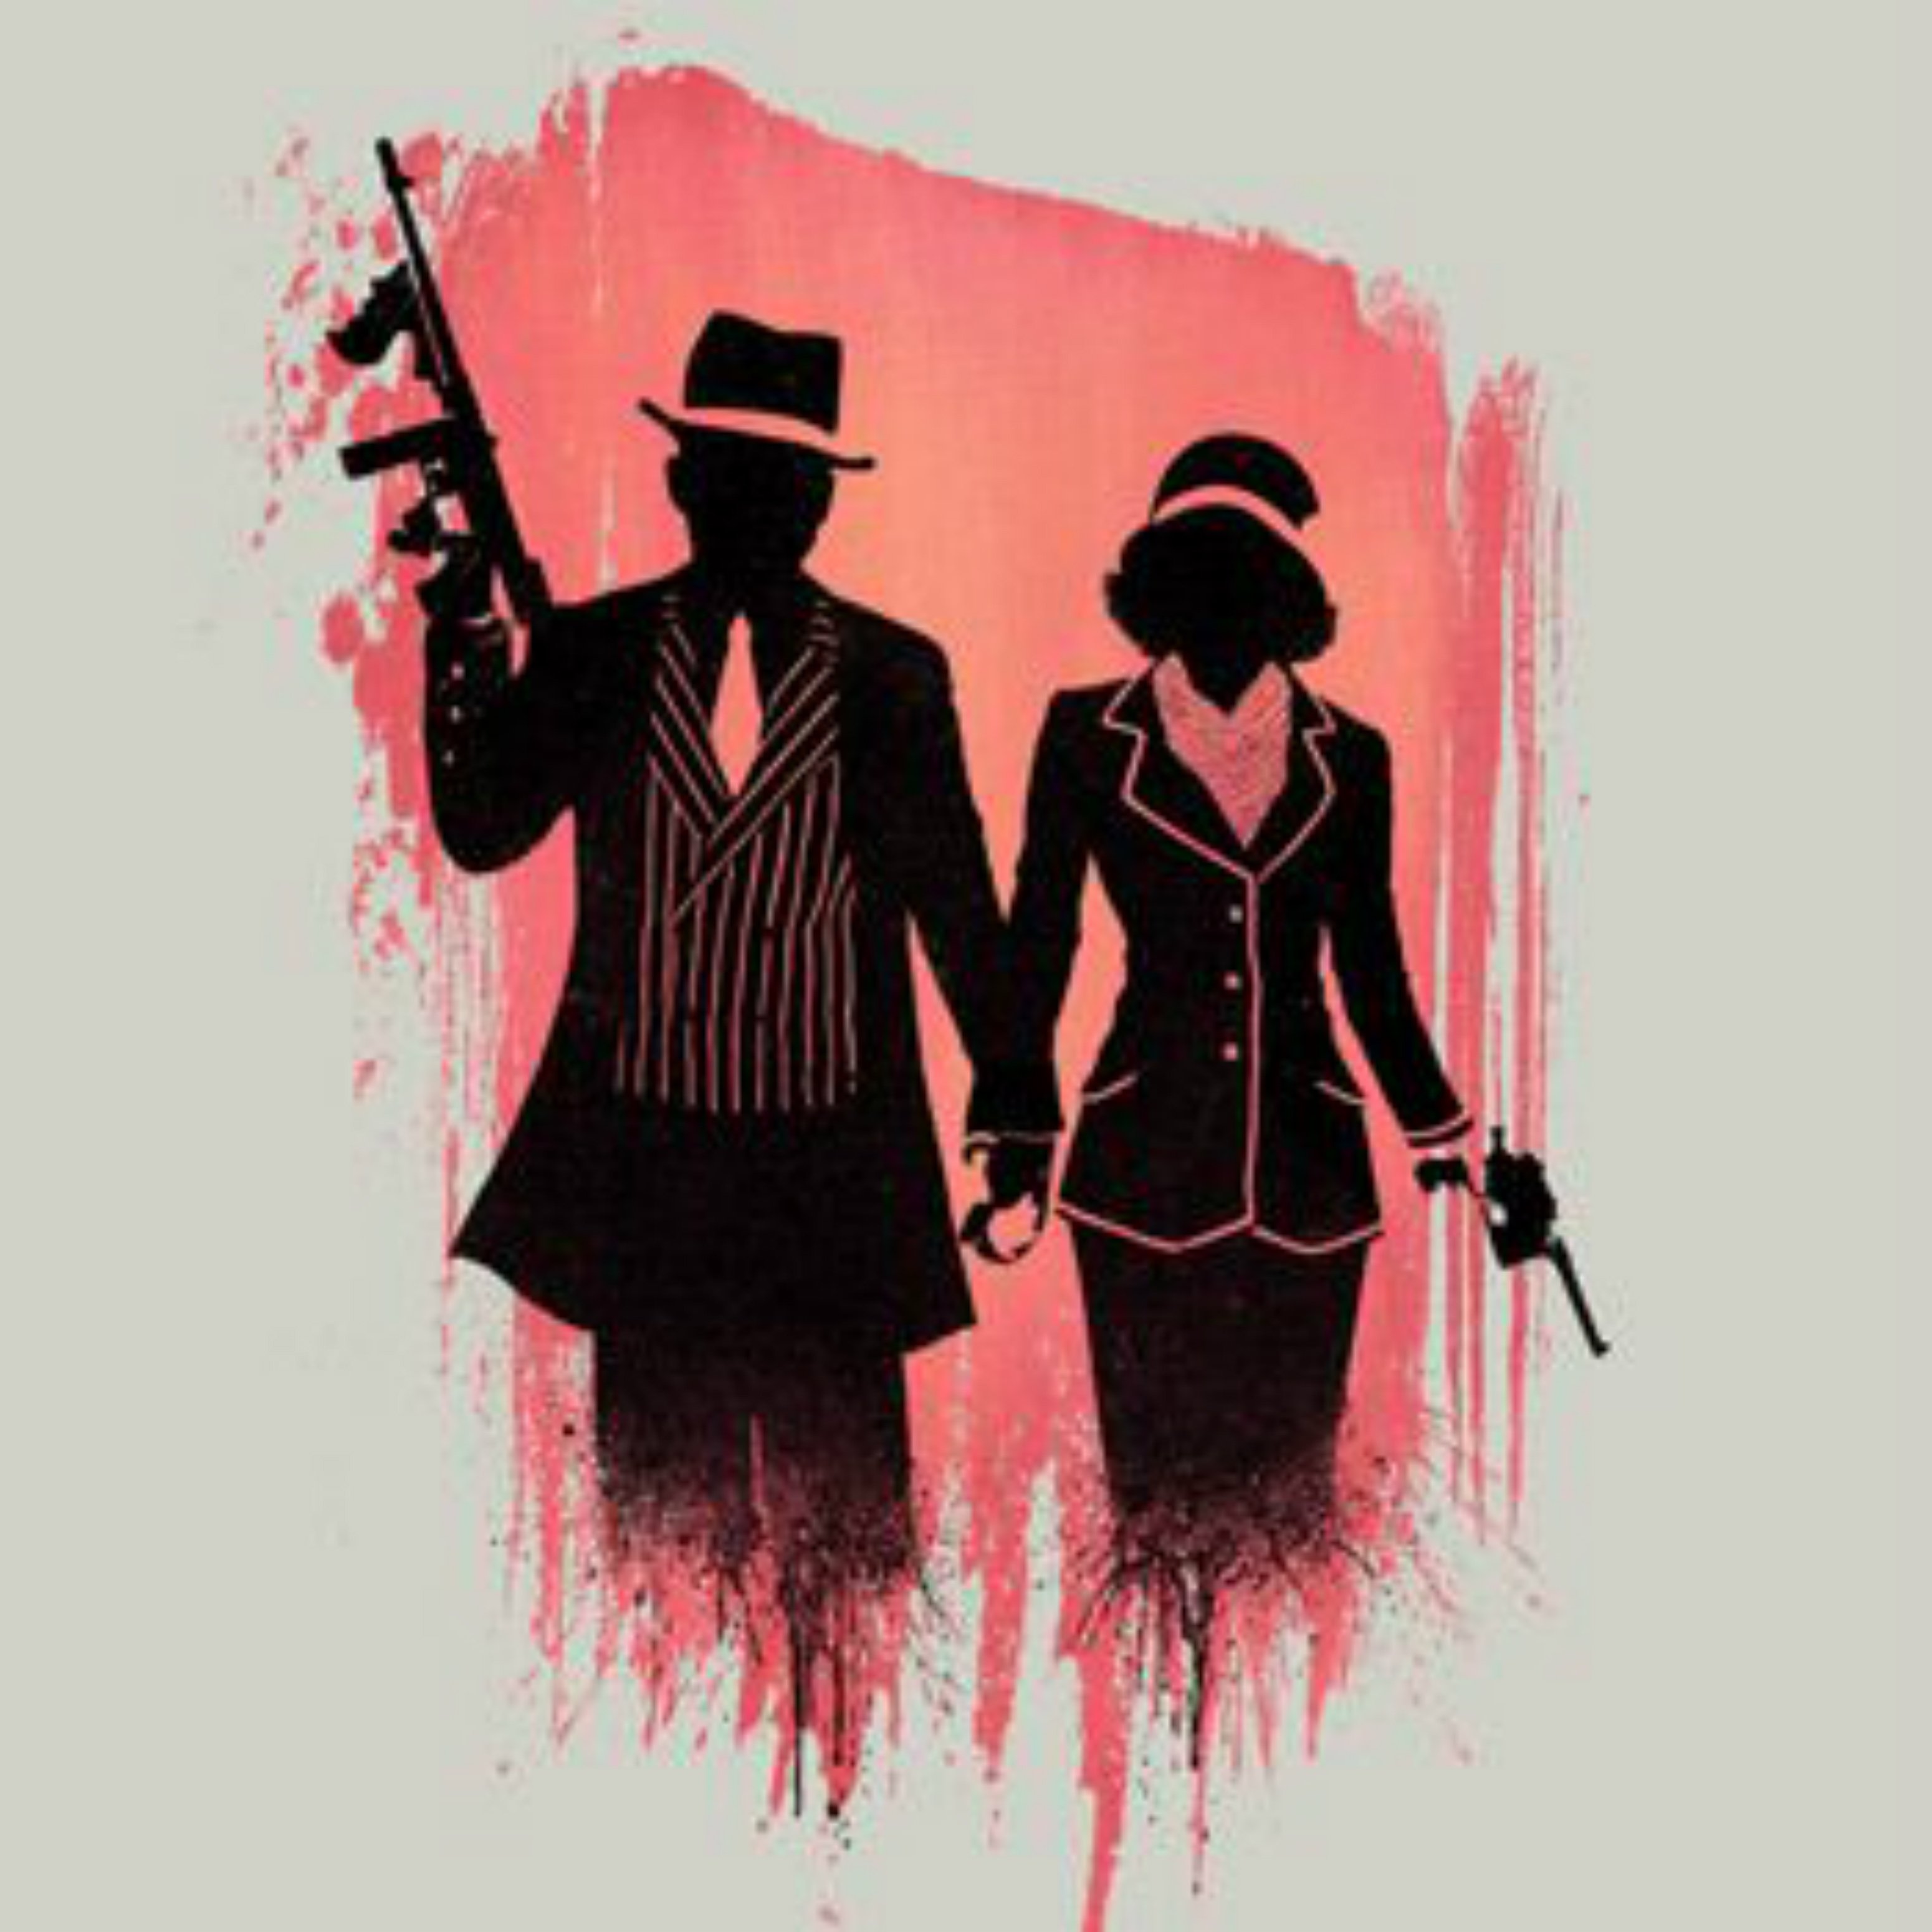 bonnie and clyde quotes